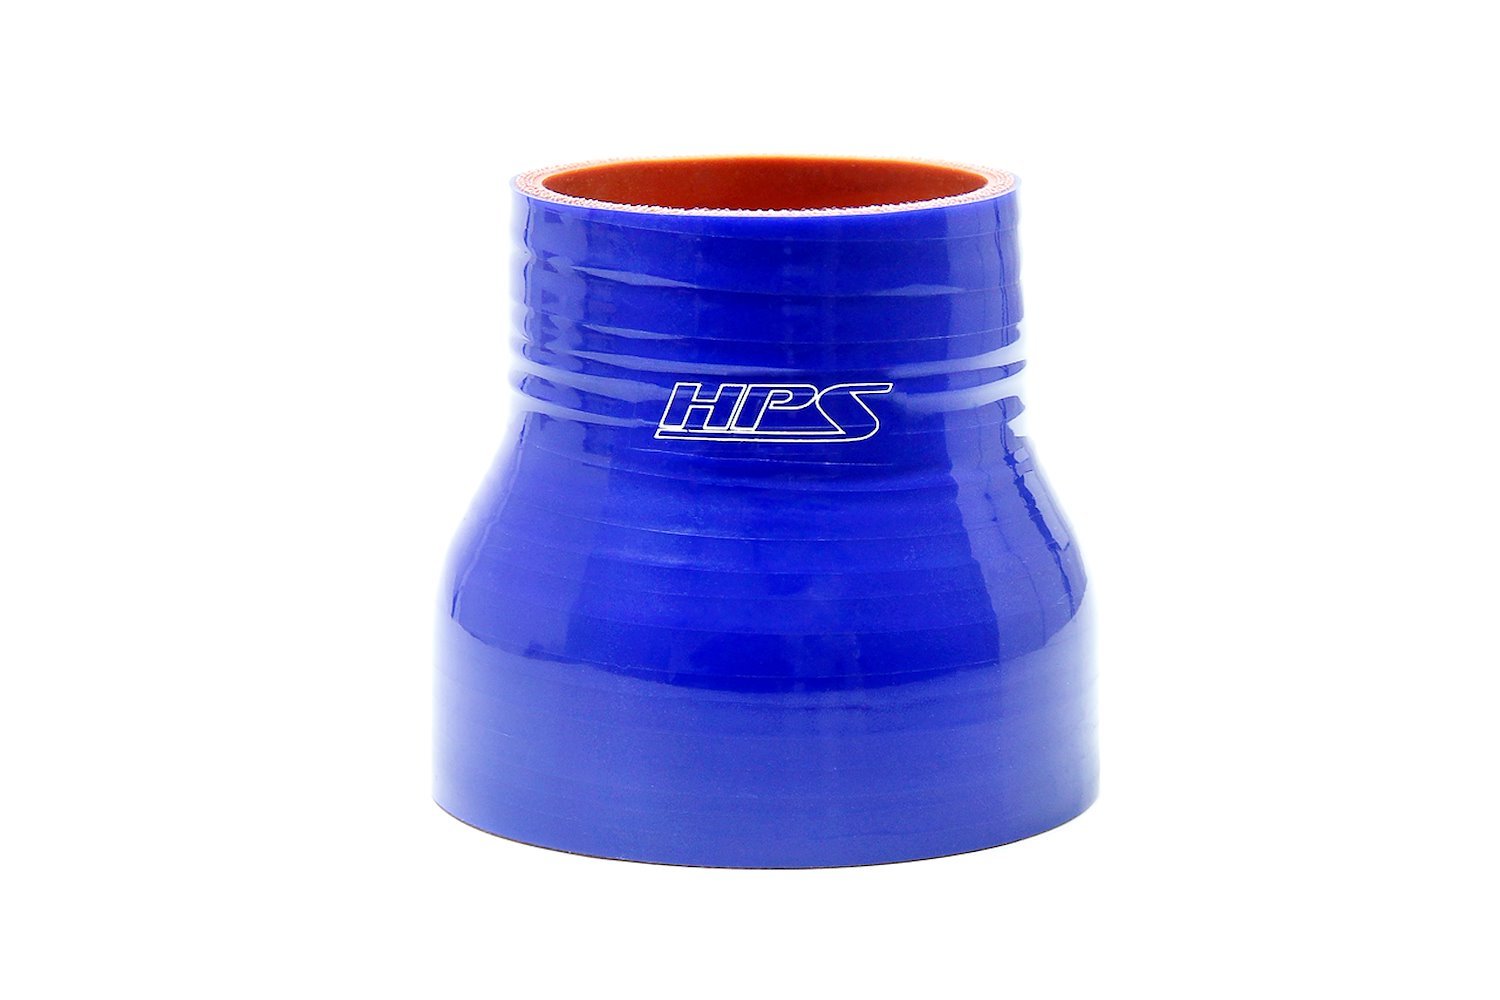 HTSR-175-275-BLUE Silicone Reducer Hose, High-Temp 4-Ply Reinforced, 1-3/4 in. - 2-3/4 in. ID, 3 in. Long, Blue